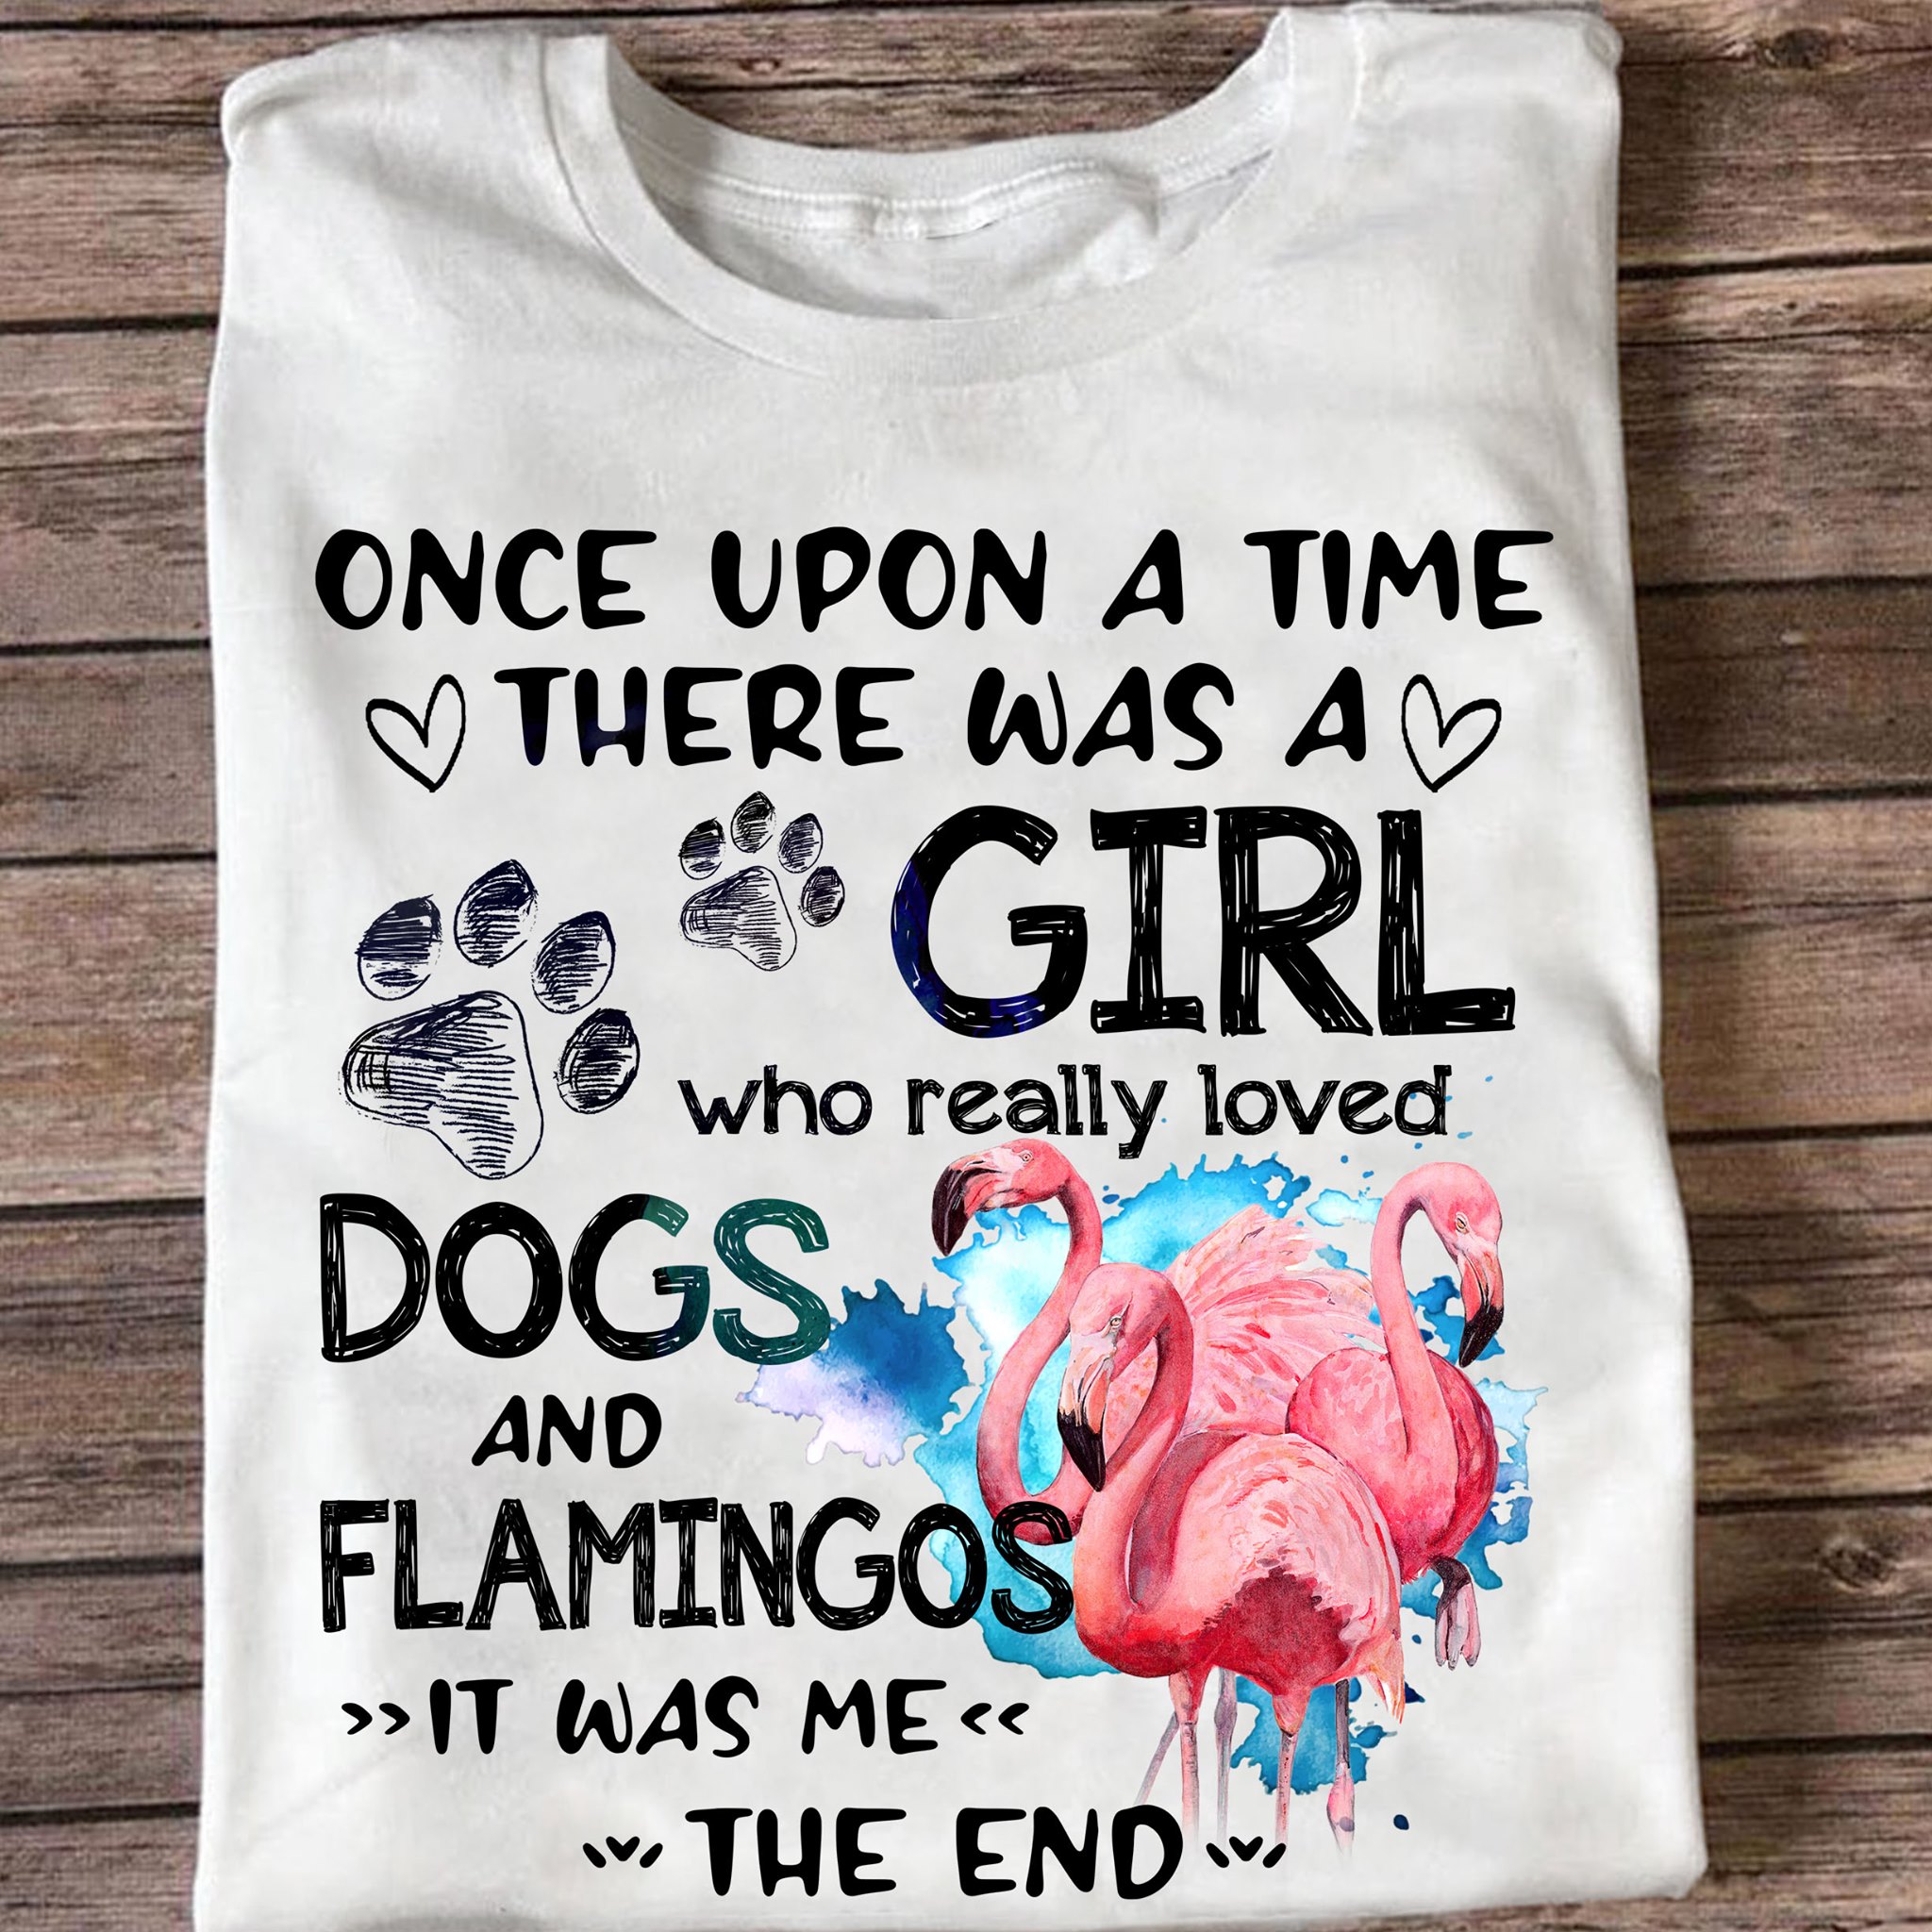 Once upon a time there was a girl who really loved dogs and flamingos